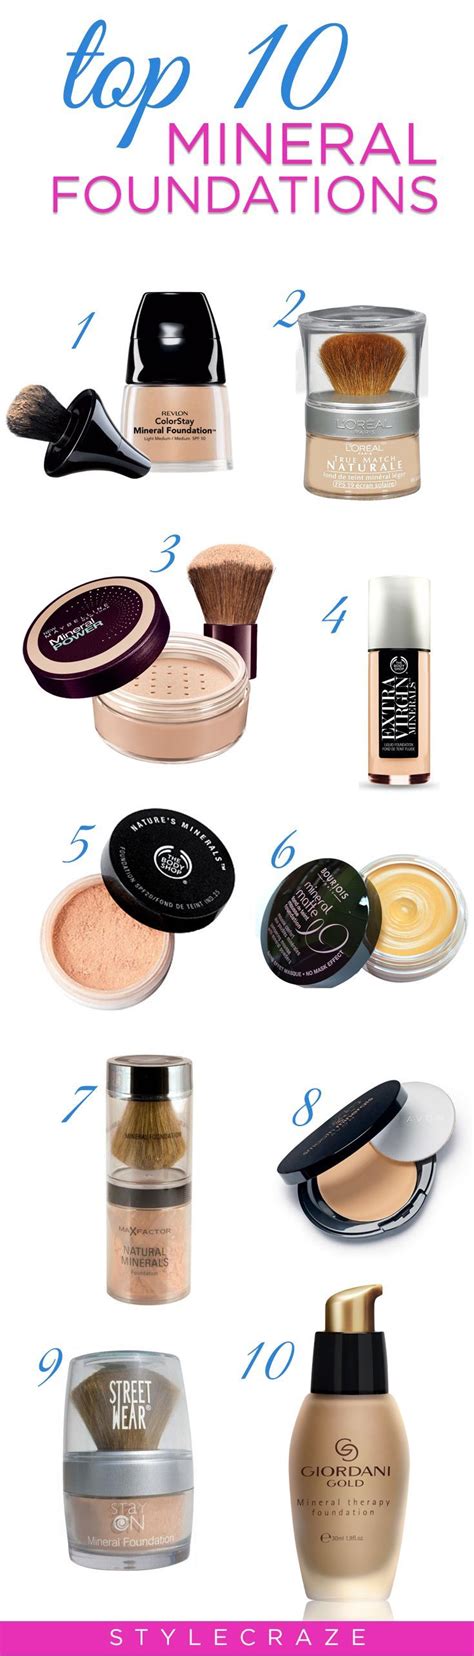 15 Best Mineral Foundations For All Skin Types Minerals Makeup